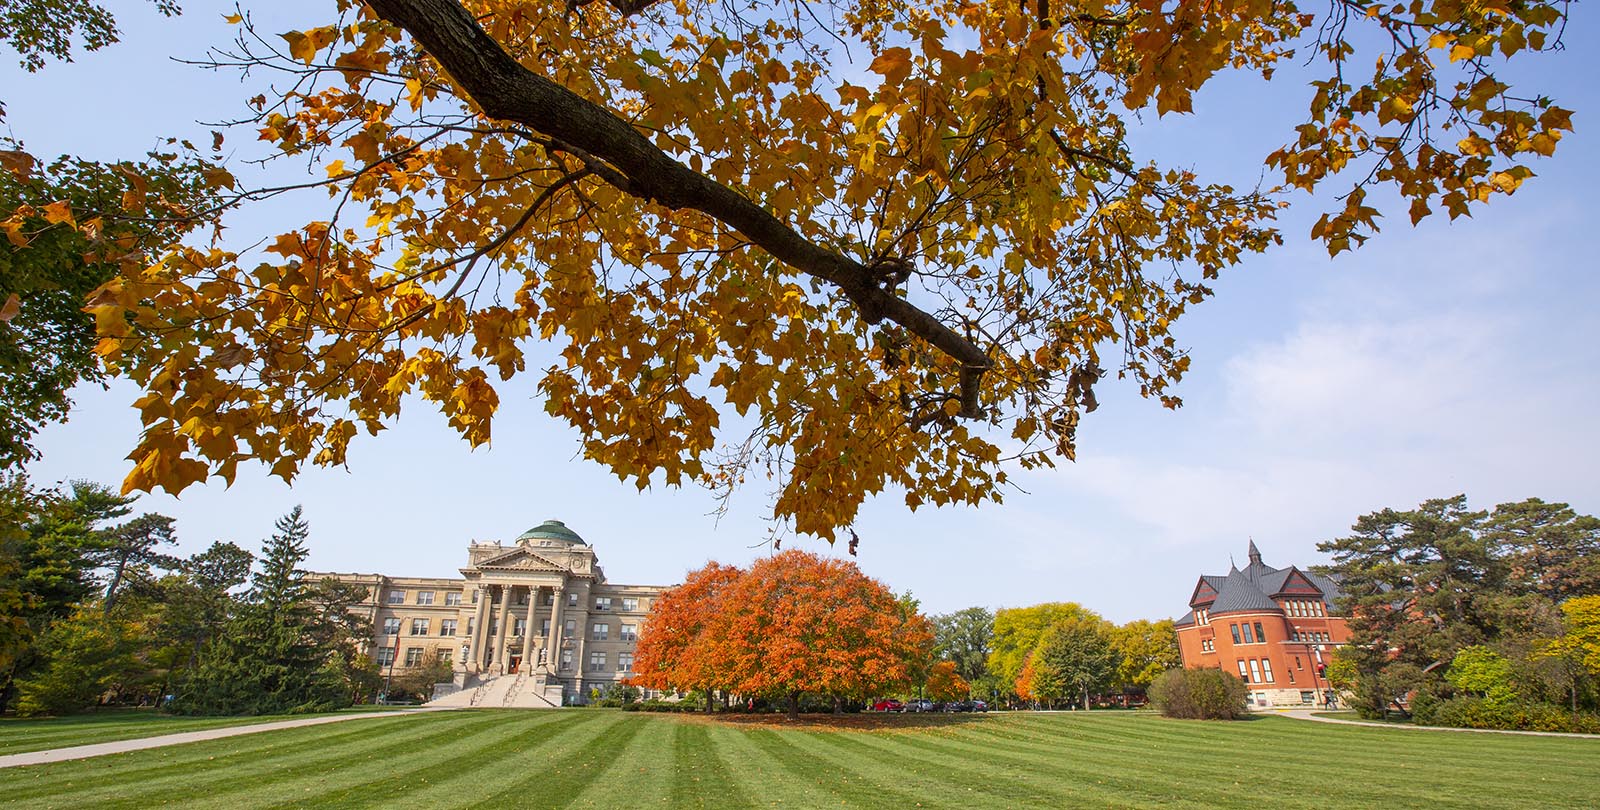 Fall view of Beardshear and Morrill Halls from central campus